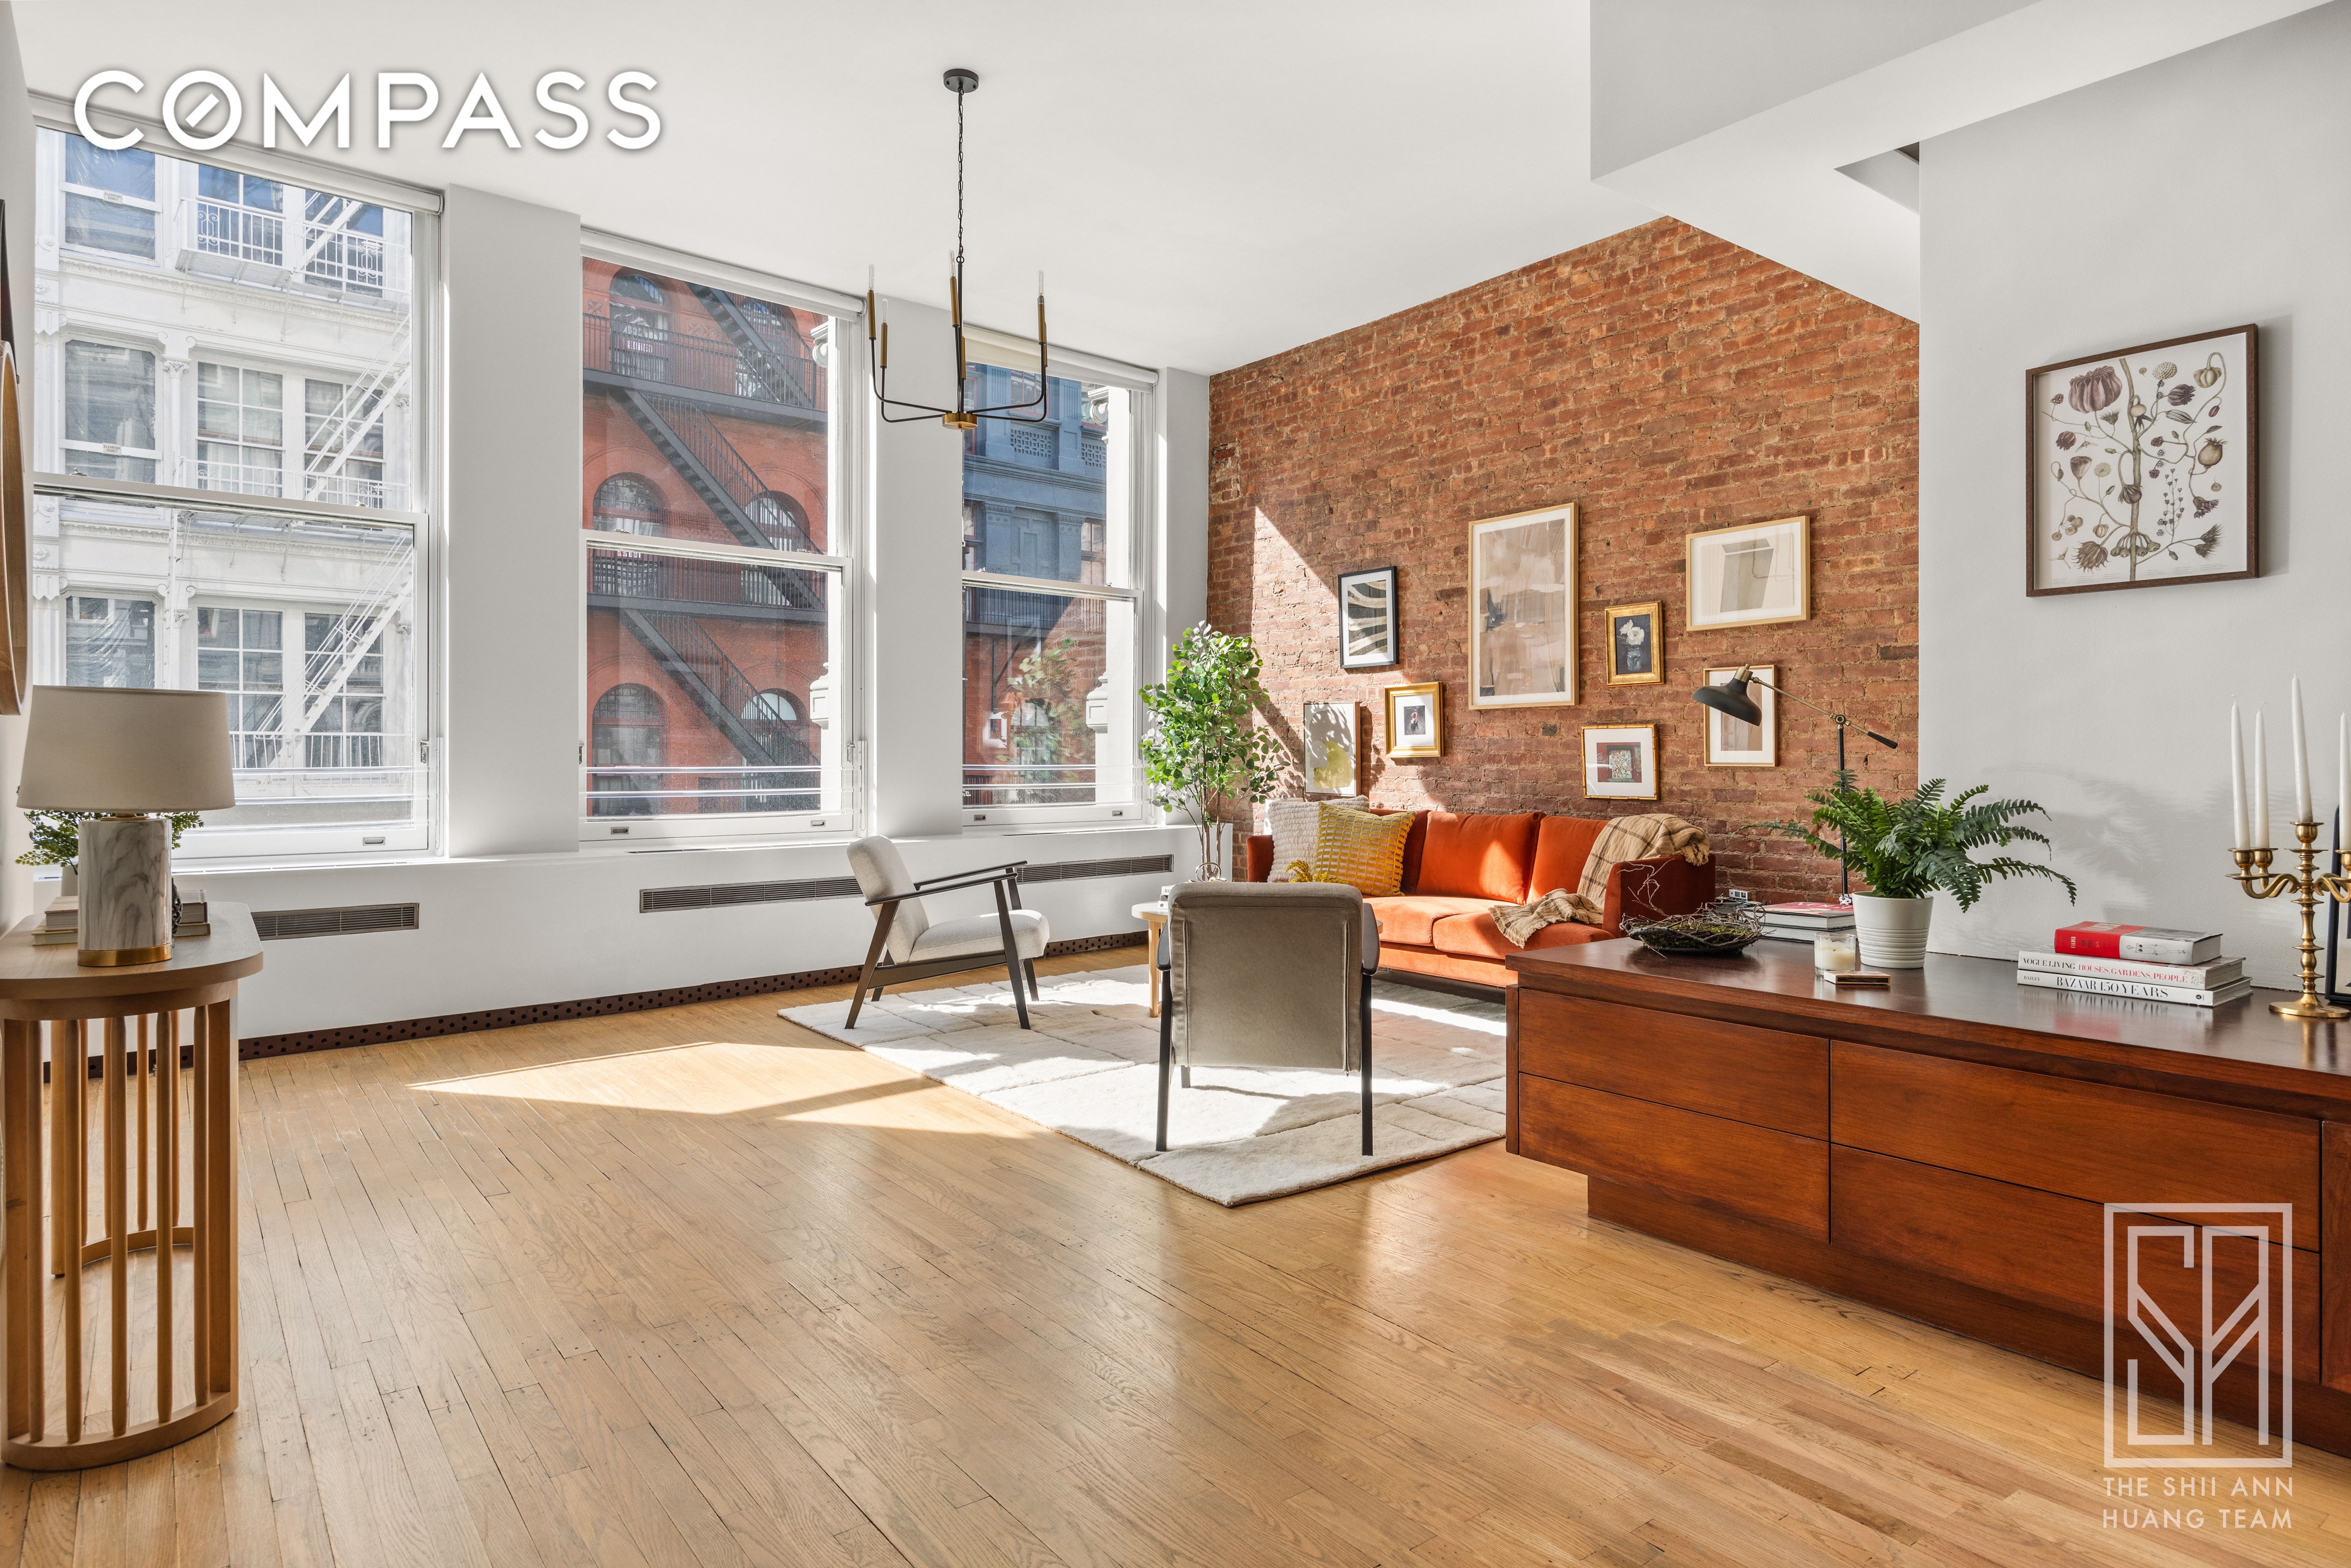 438 Broome Street 2, Soho, Downtown, NYC - 2 Bedrooms  
2 Bathrooms  
8 Rooms - 